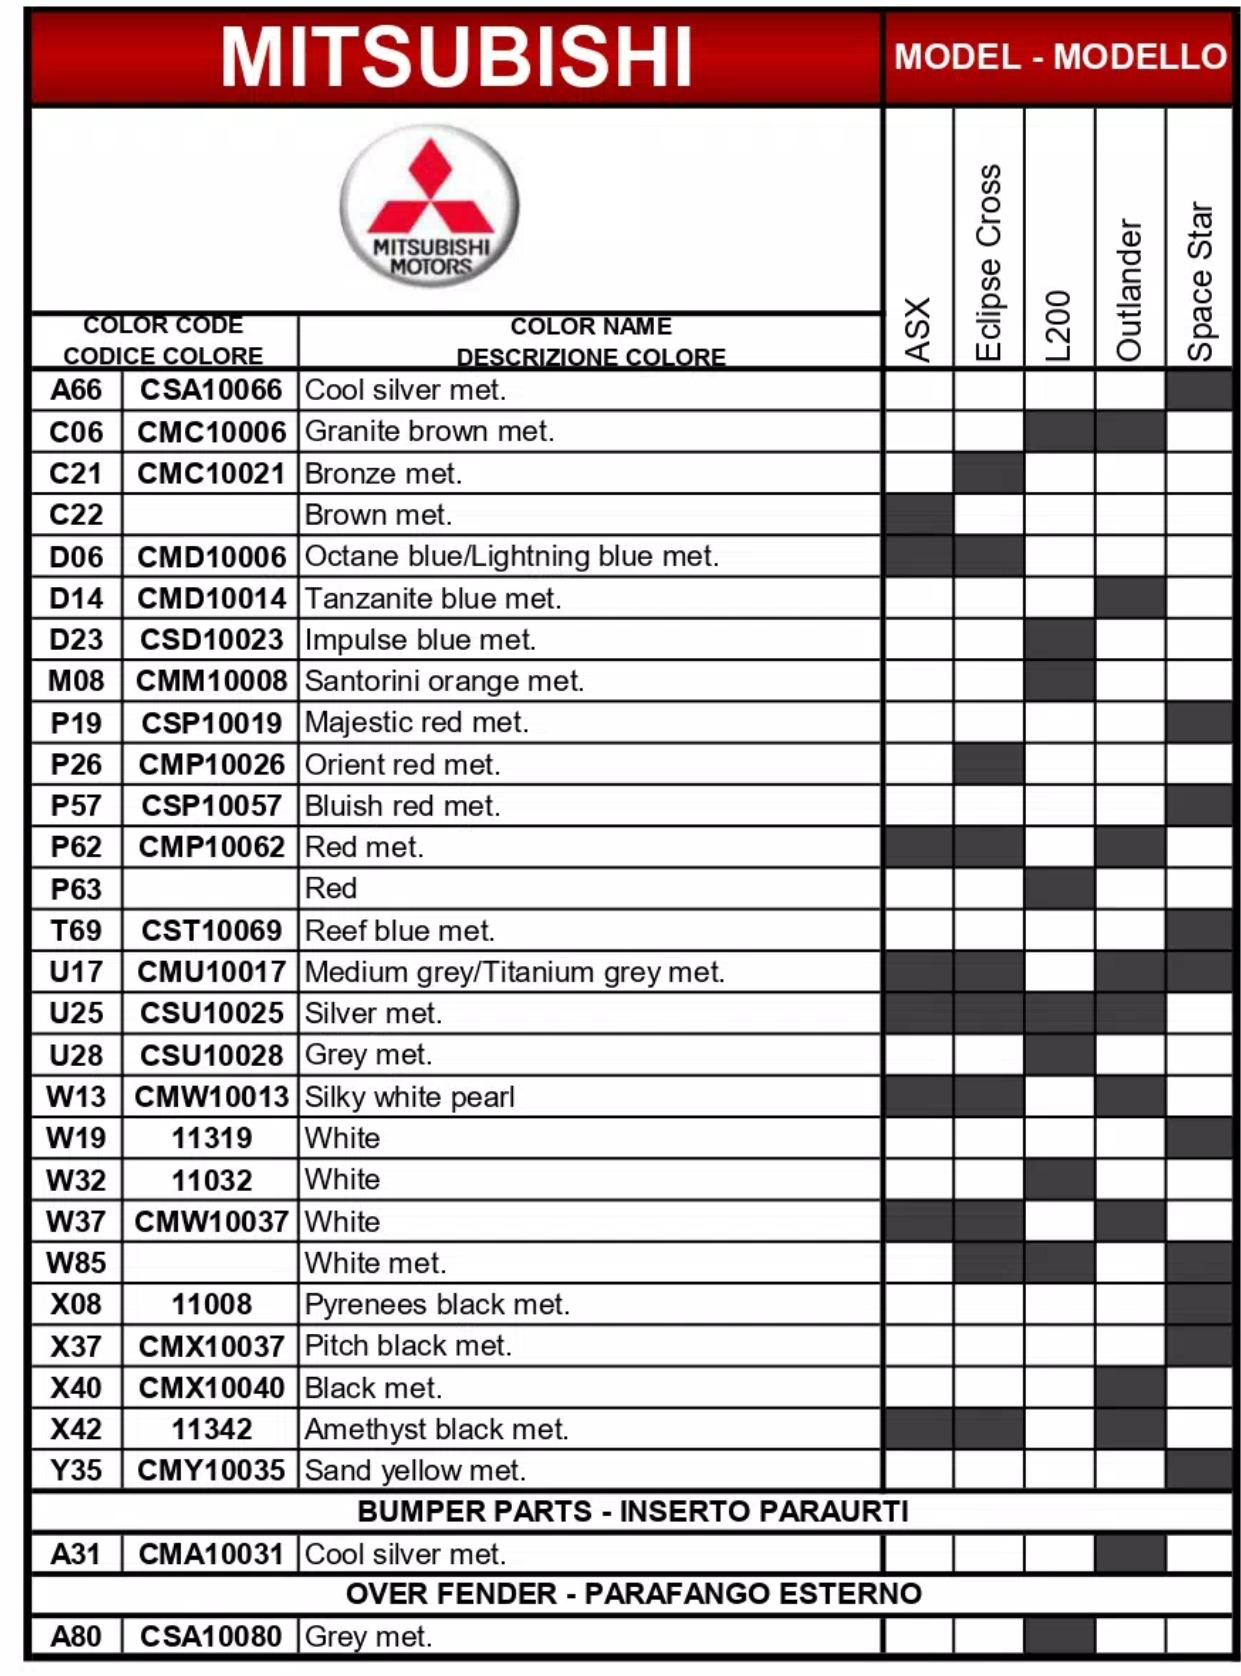 A table that shows 2021 and 2022 Mitsubishi paint codes to the model they go to.